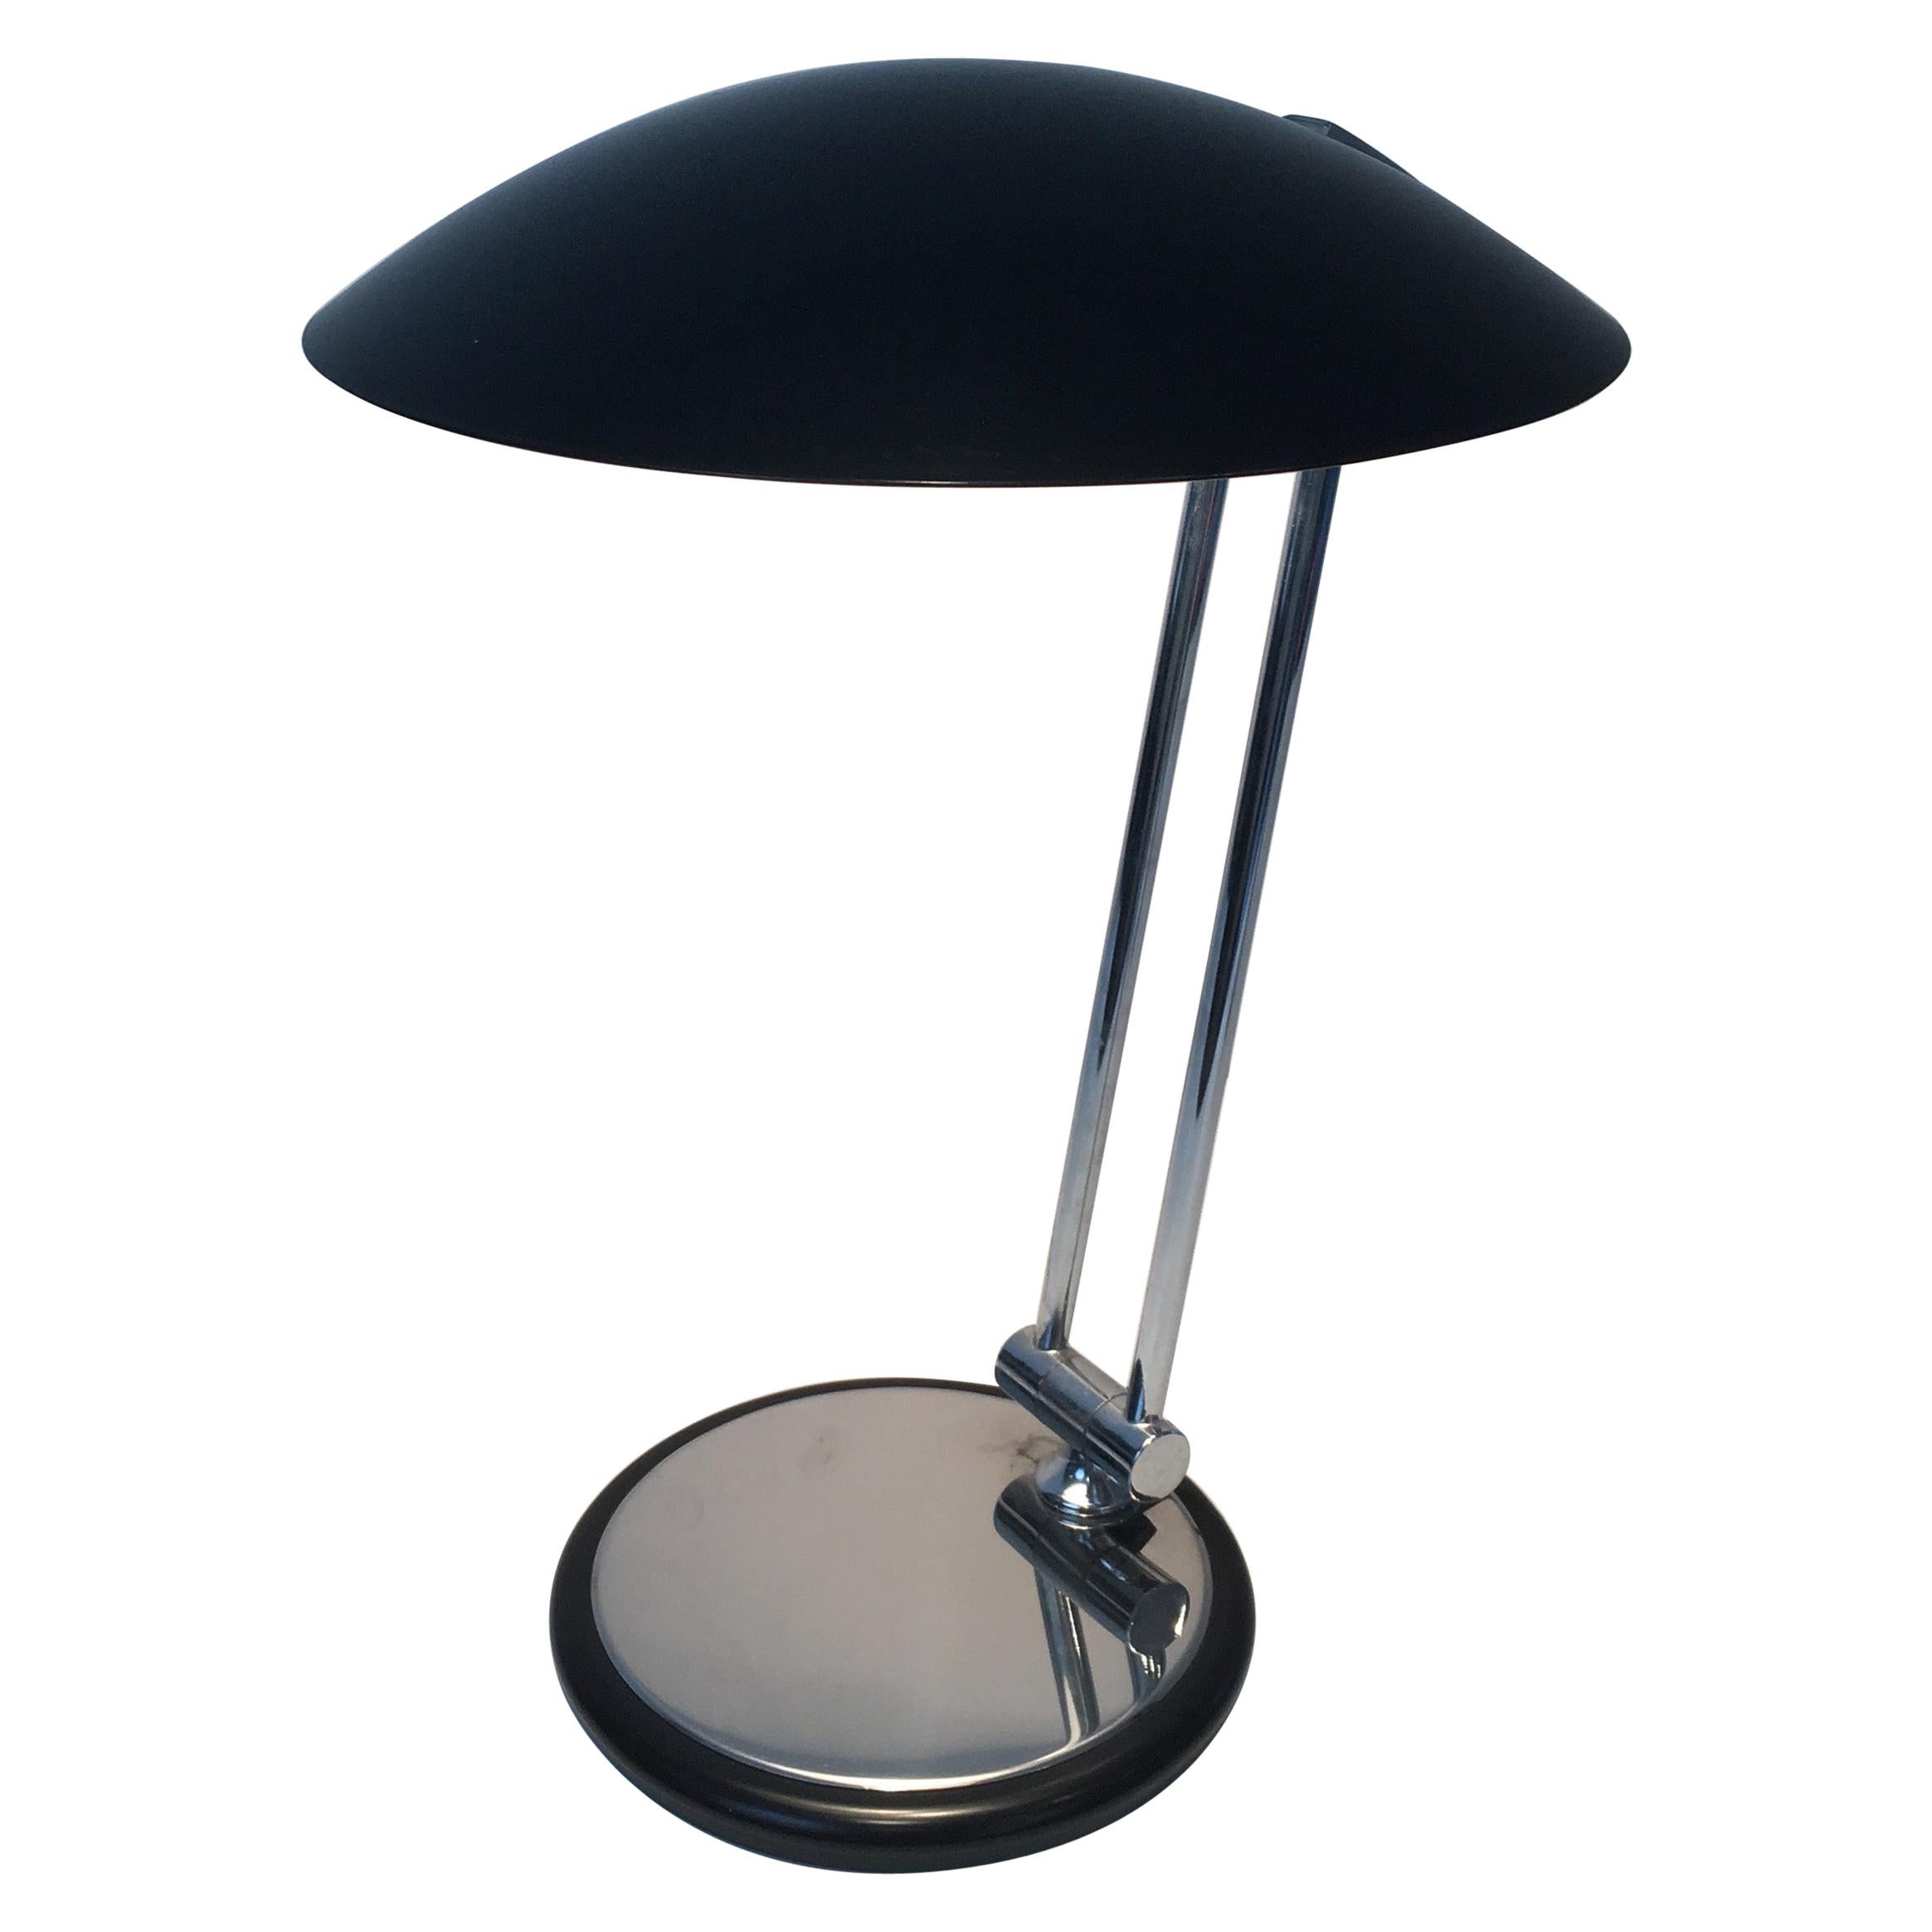 Design Adjustable Chrome and Black Lacquered Desk Lamp, circa 1970 For Sale